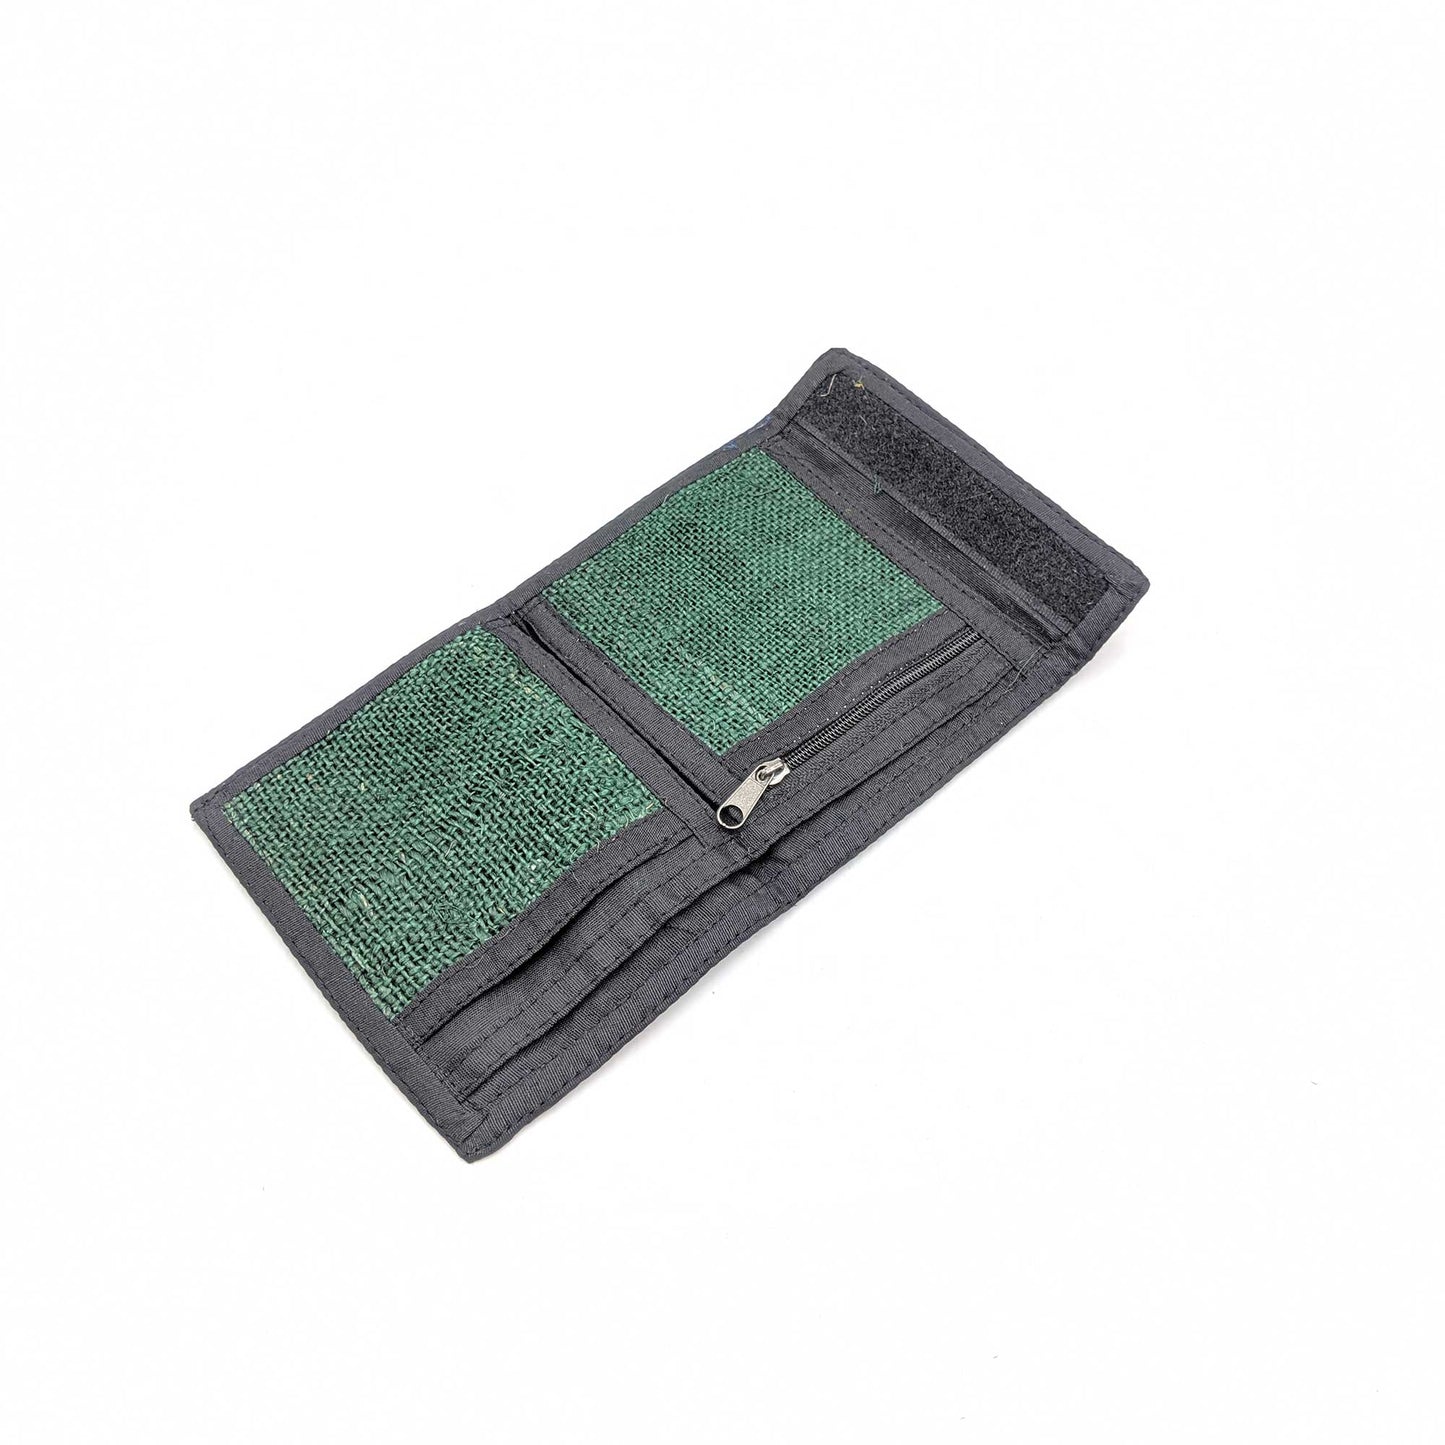 Organic and eco-friendly 2 fold wallet in green color